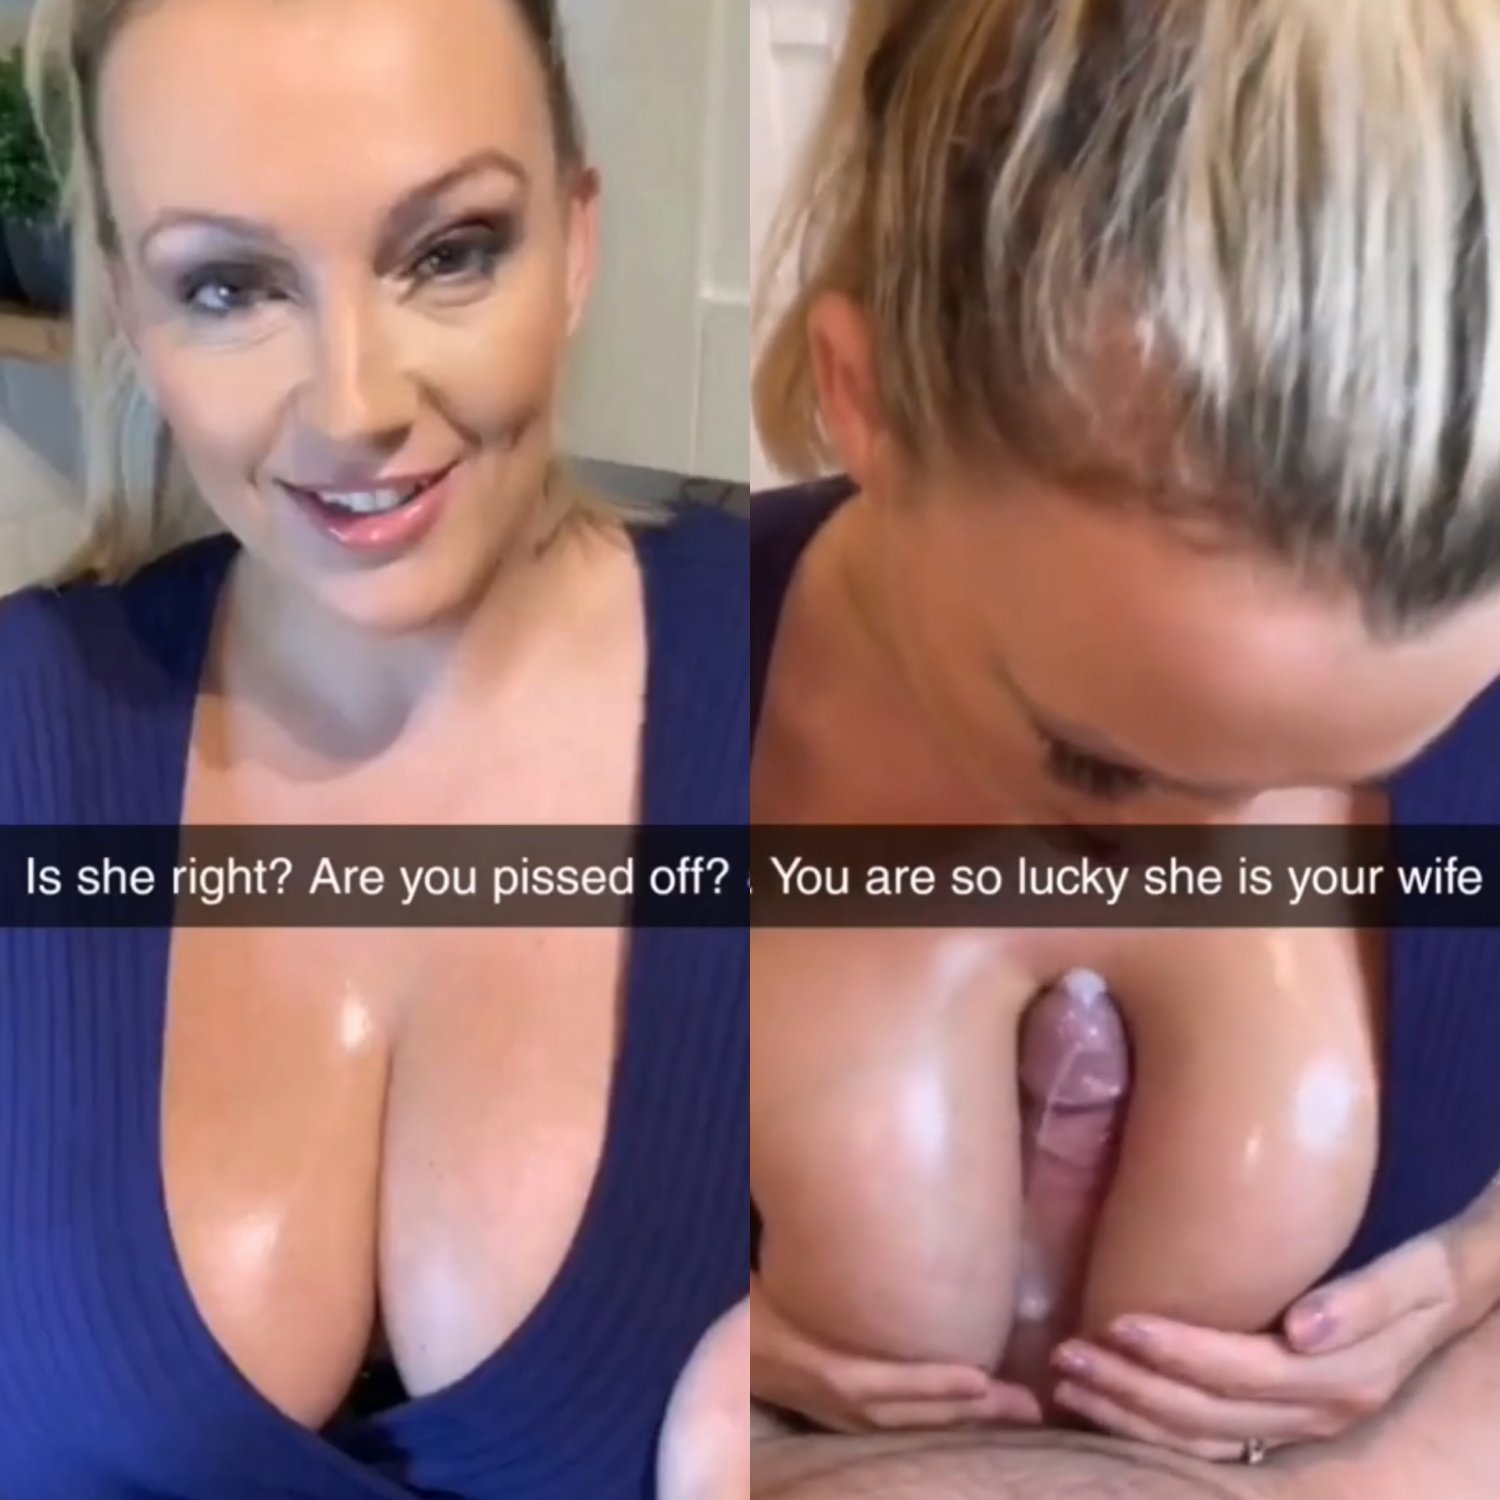 Cheating wife? 🤔 - Porn Videos and Photos pic